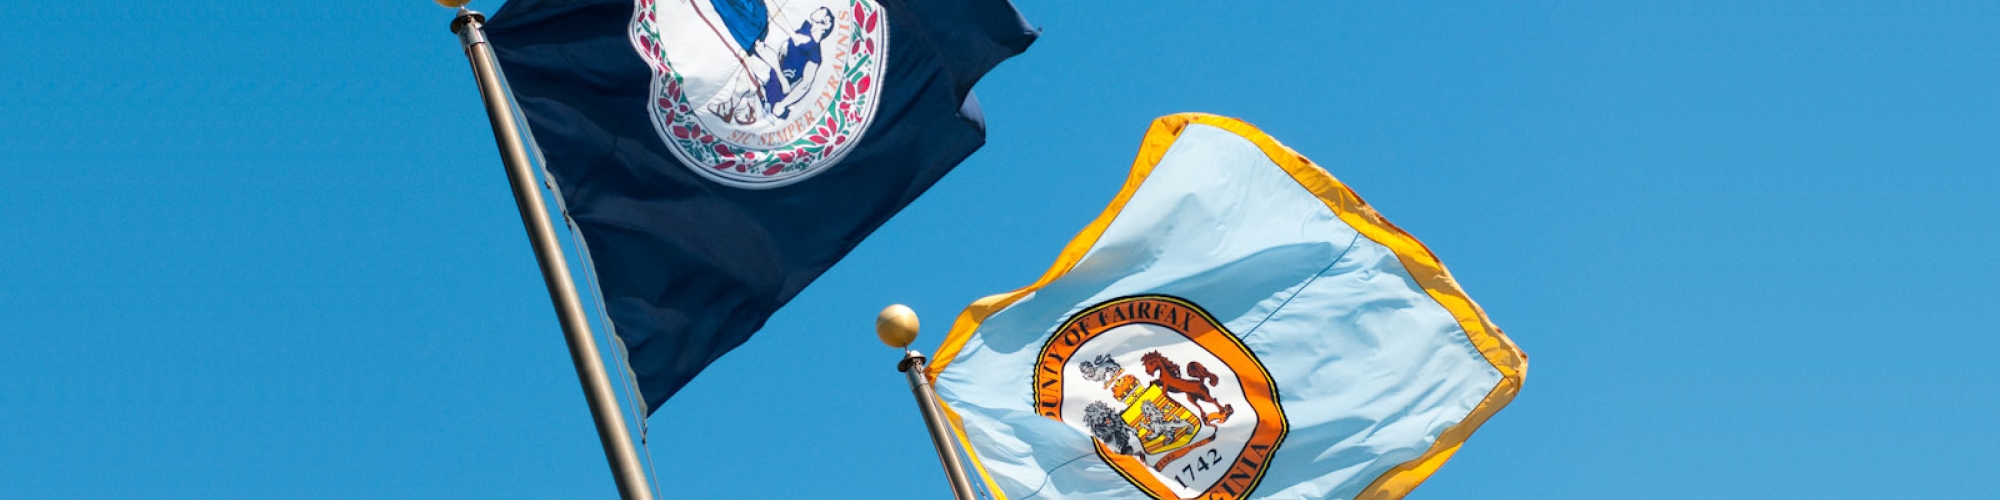 Virginia state and Fairfax county flags